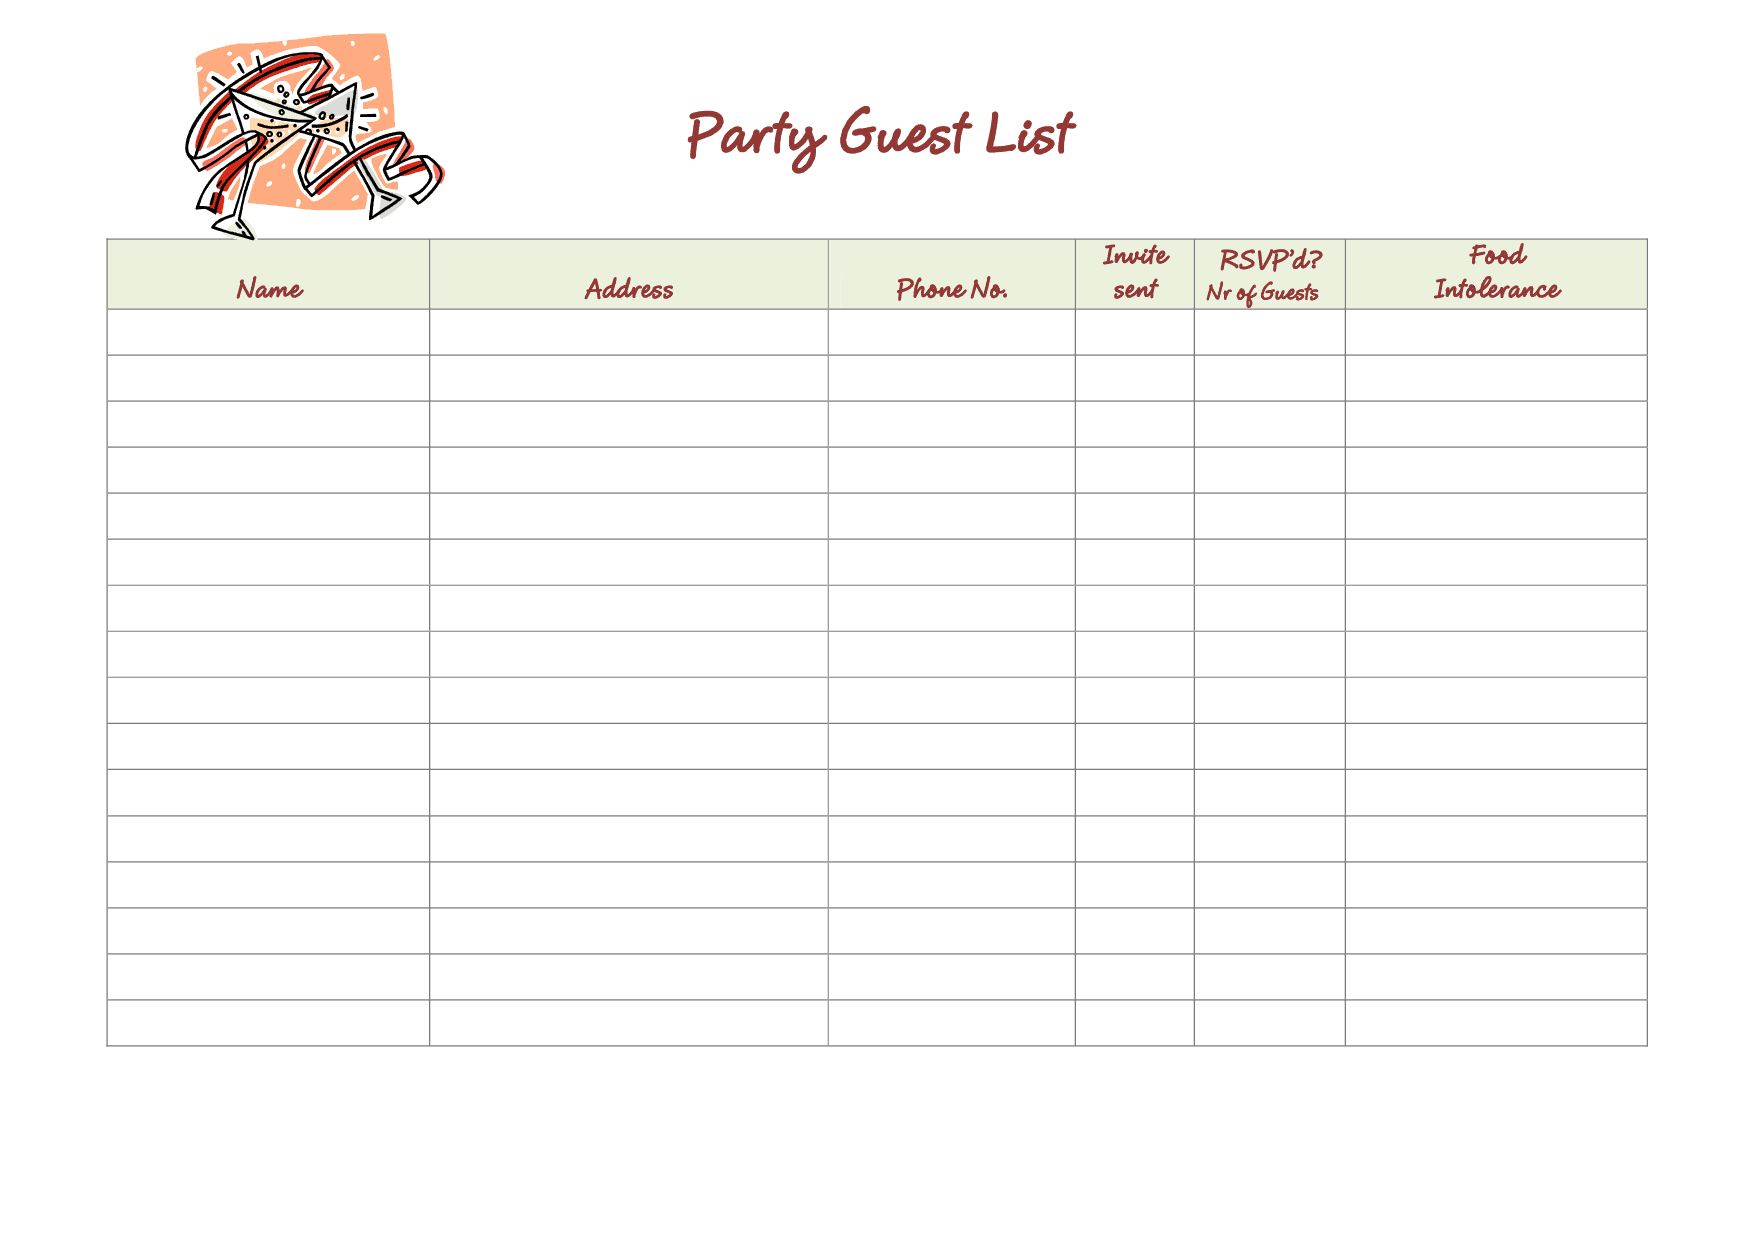 41-free-guest-list-templates-word-excel-pdf-formats